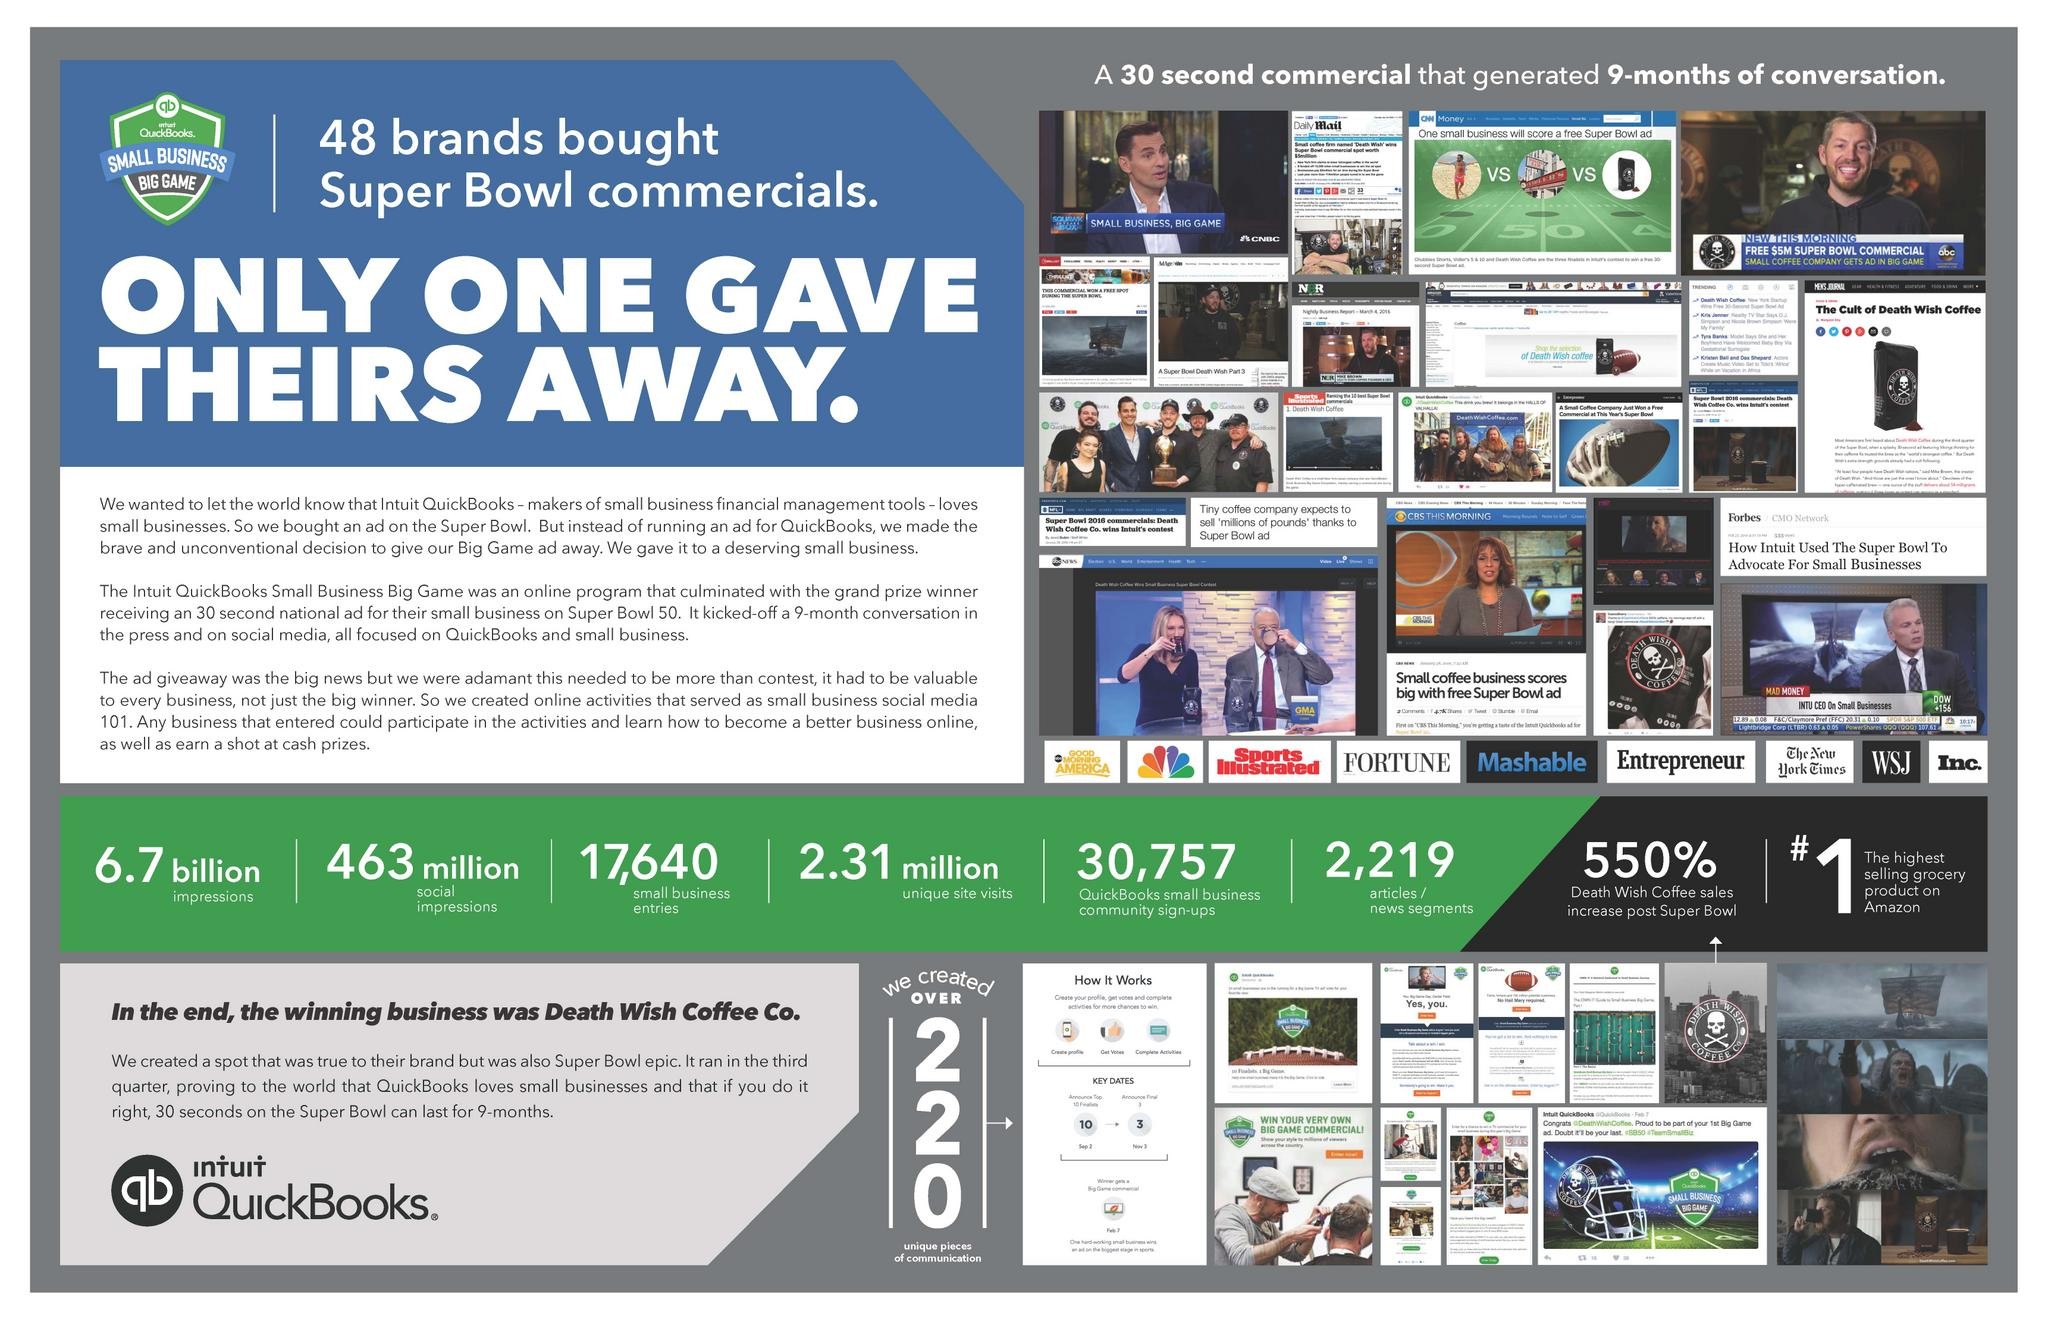 Intuit QuickBooks Small Business Big Game